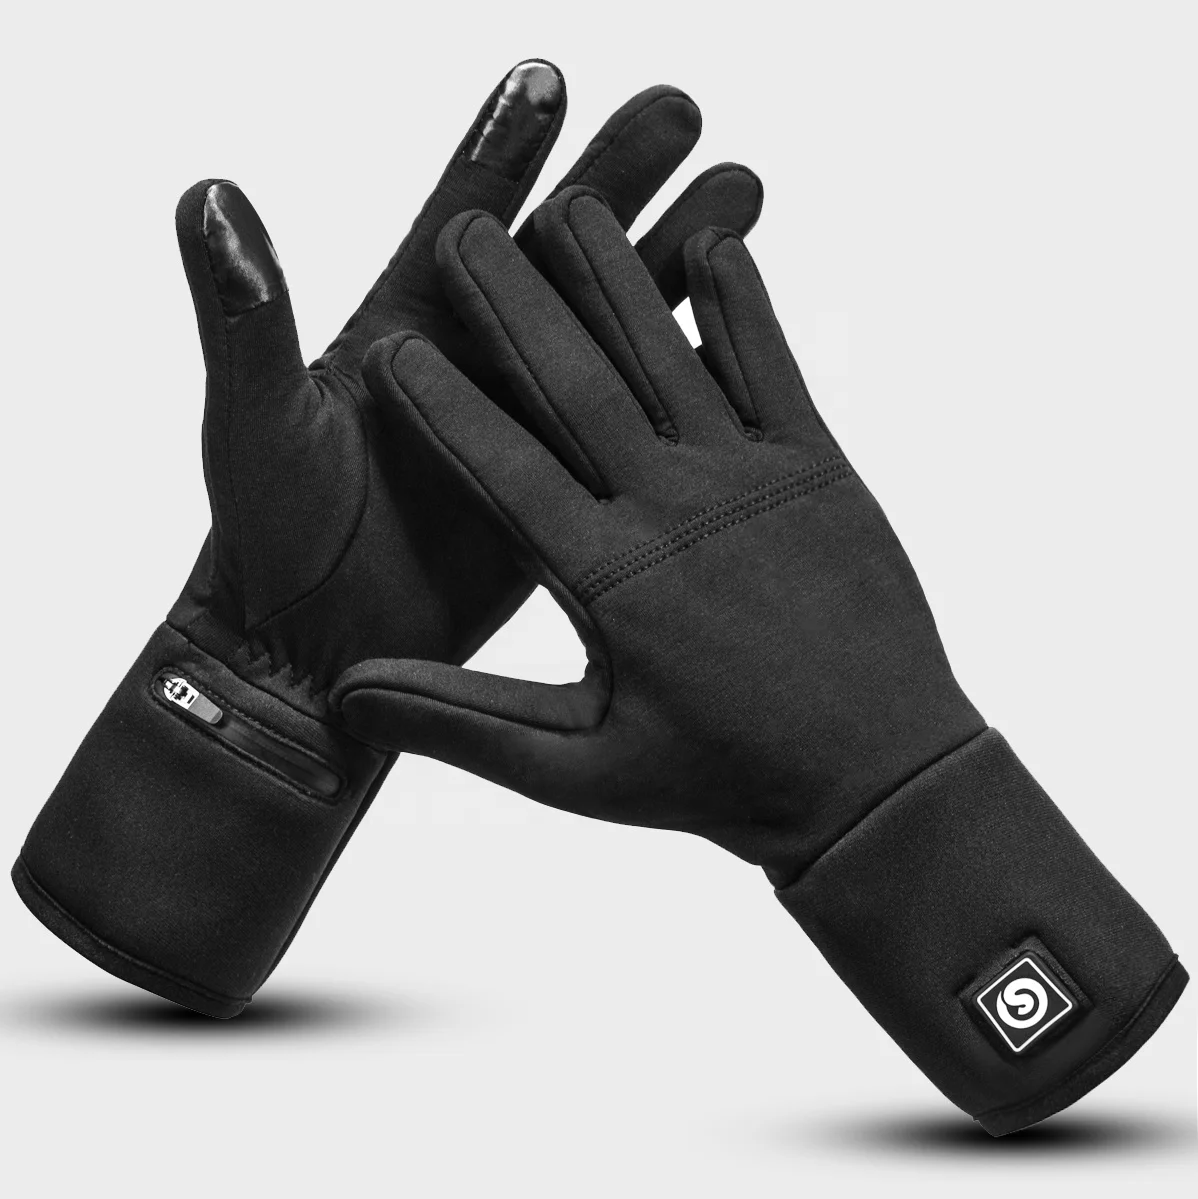 

SAVIOR 7.4V 2200Mah Rechargeable Battery Heated Glove Liner Thin Heated Gloves Bike Gloves, Black or customized